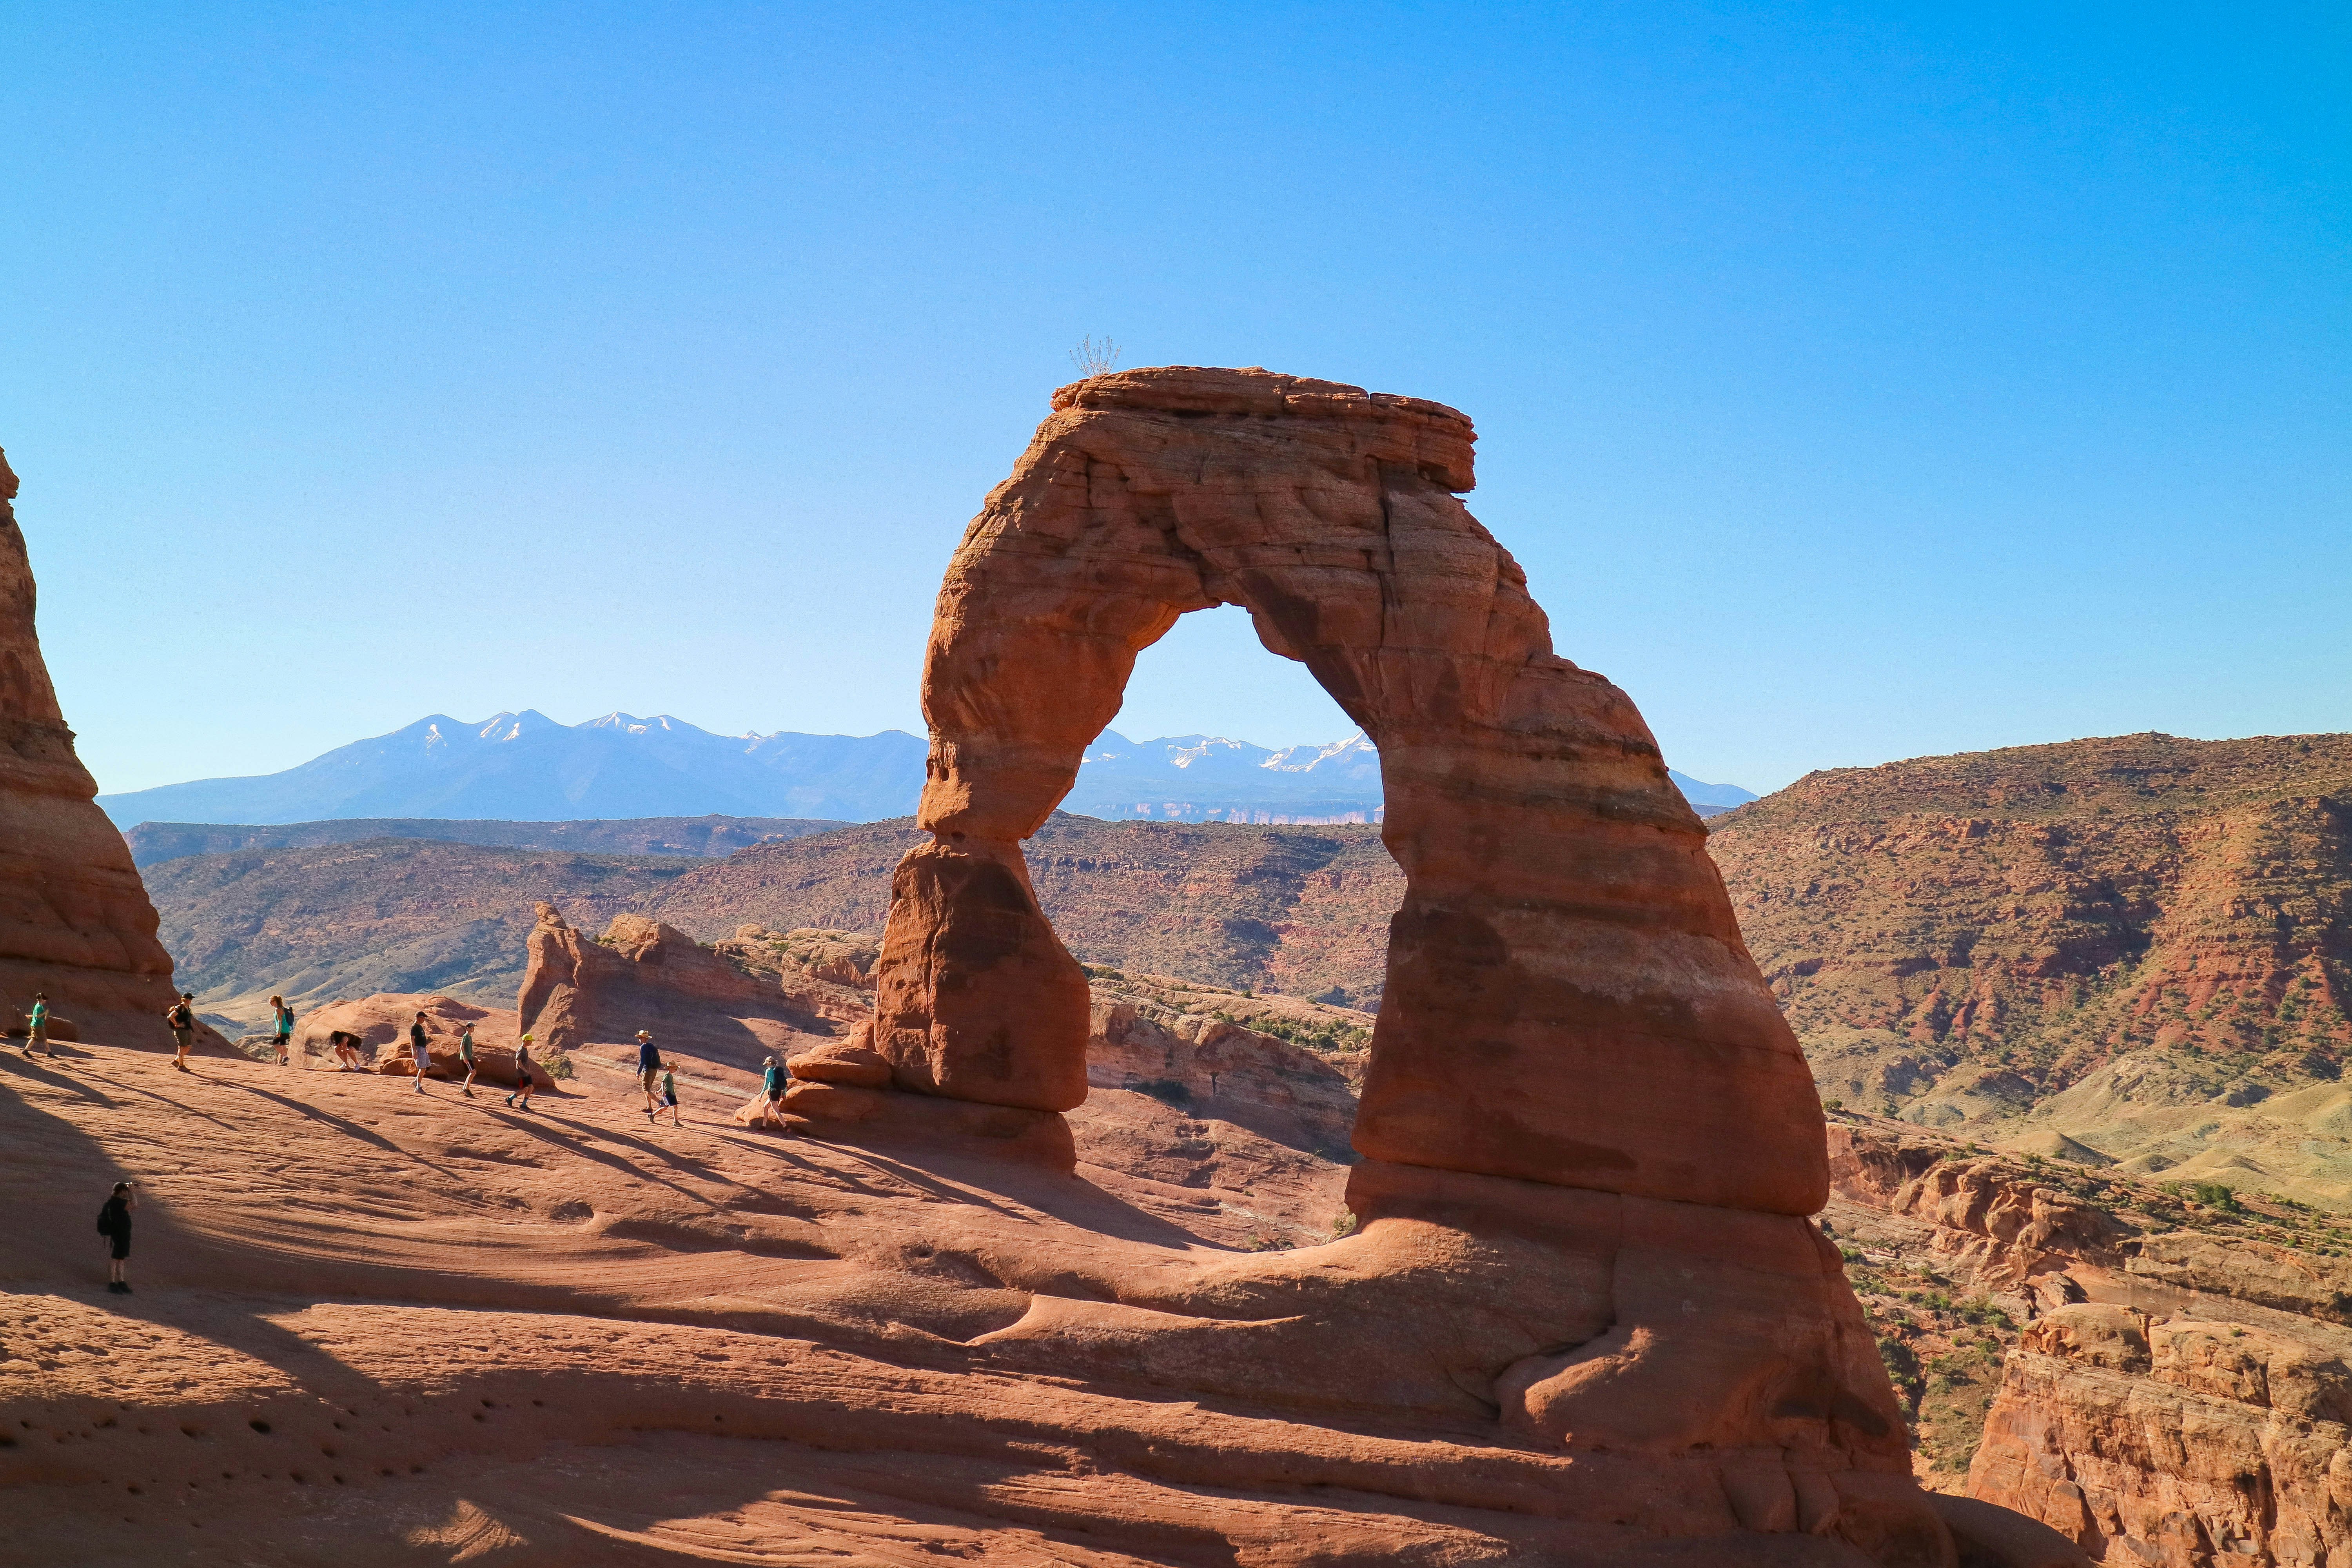 a rock formation in the desert with Arches National Park in the background